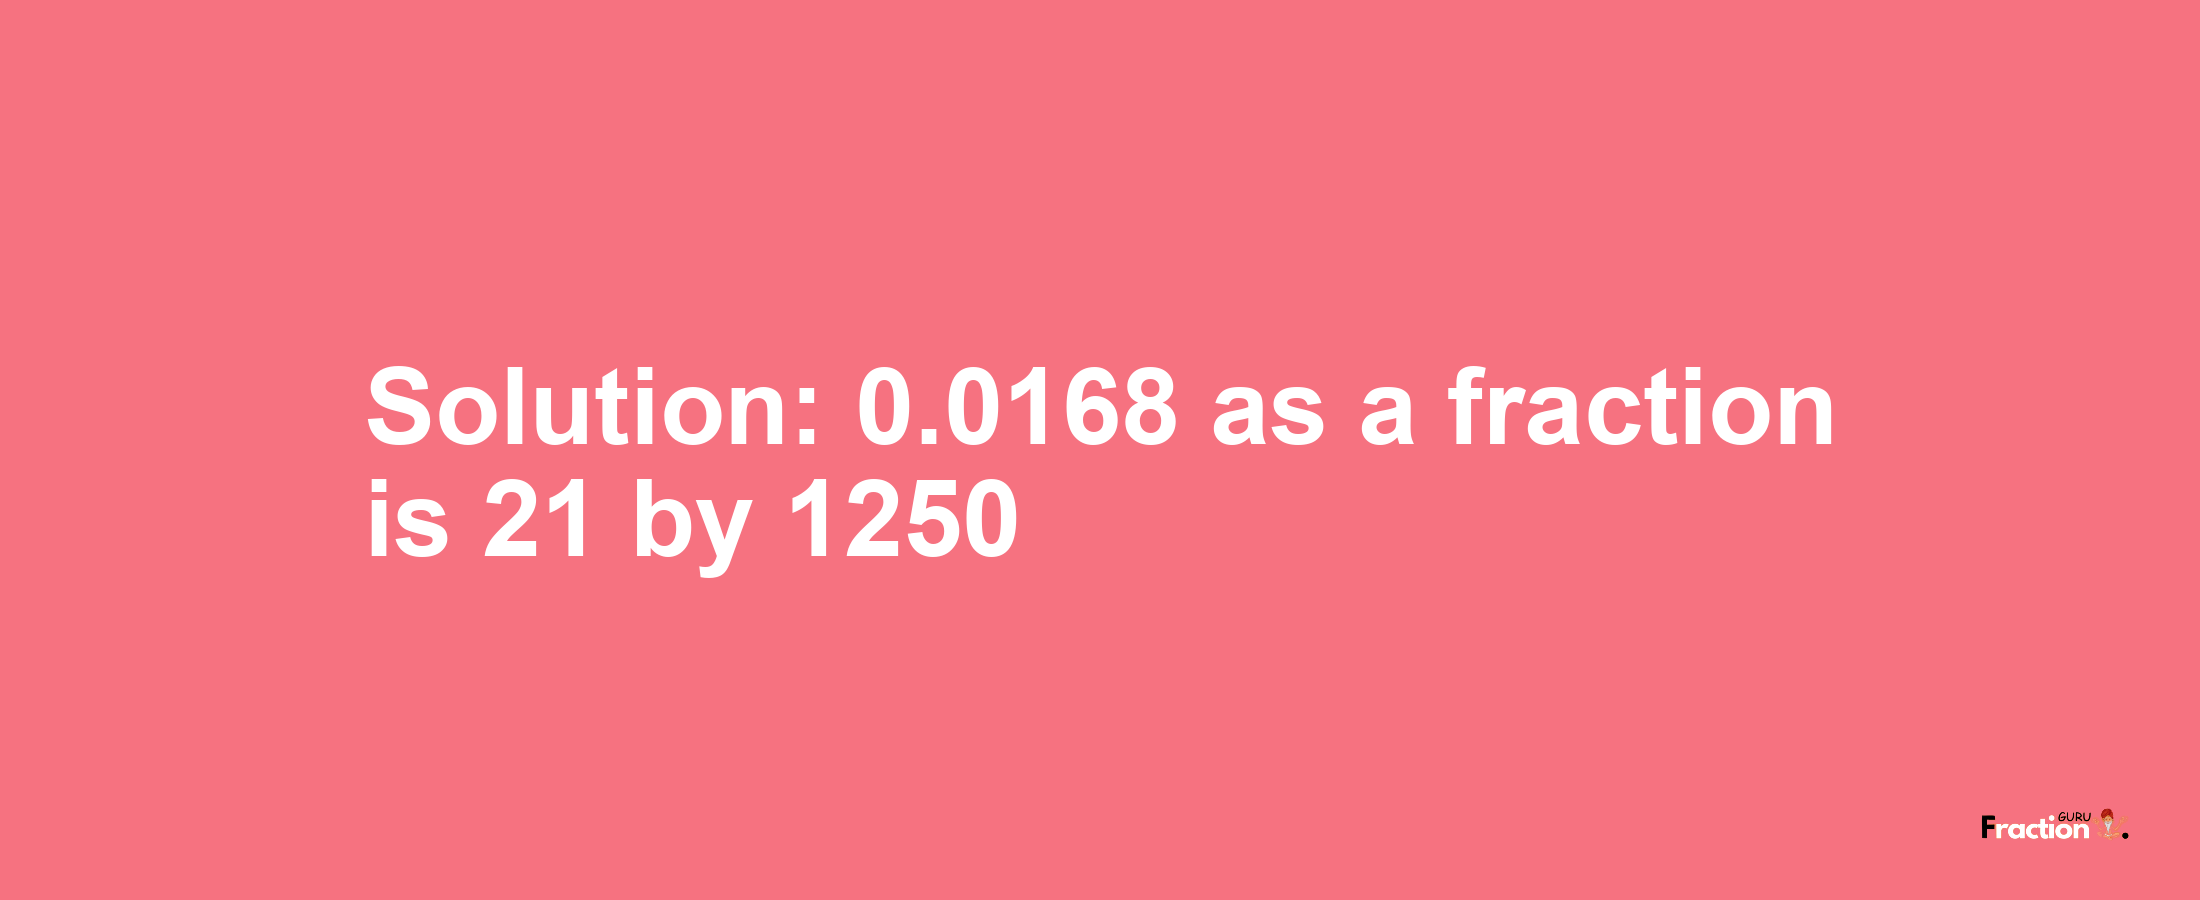 Solution:0.0168 as a fraction is 21/1250